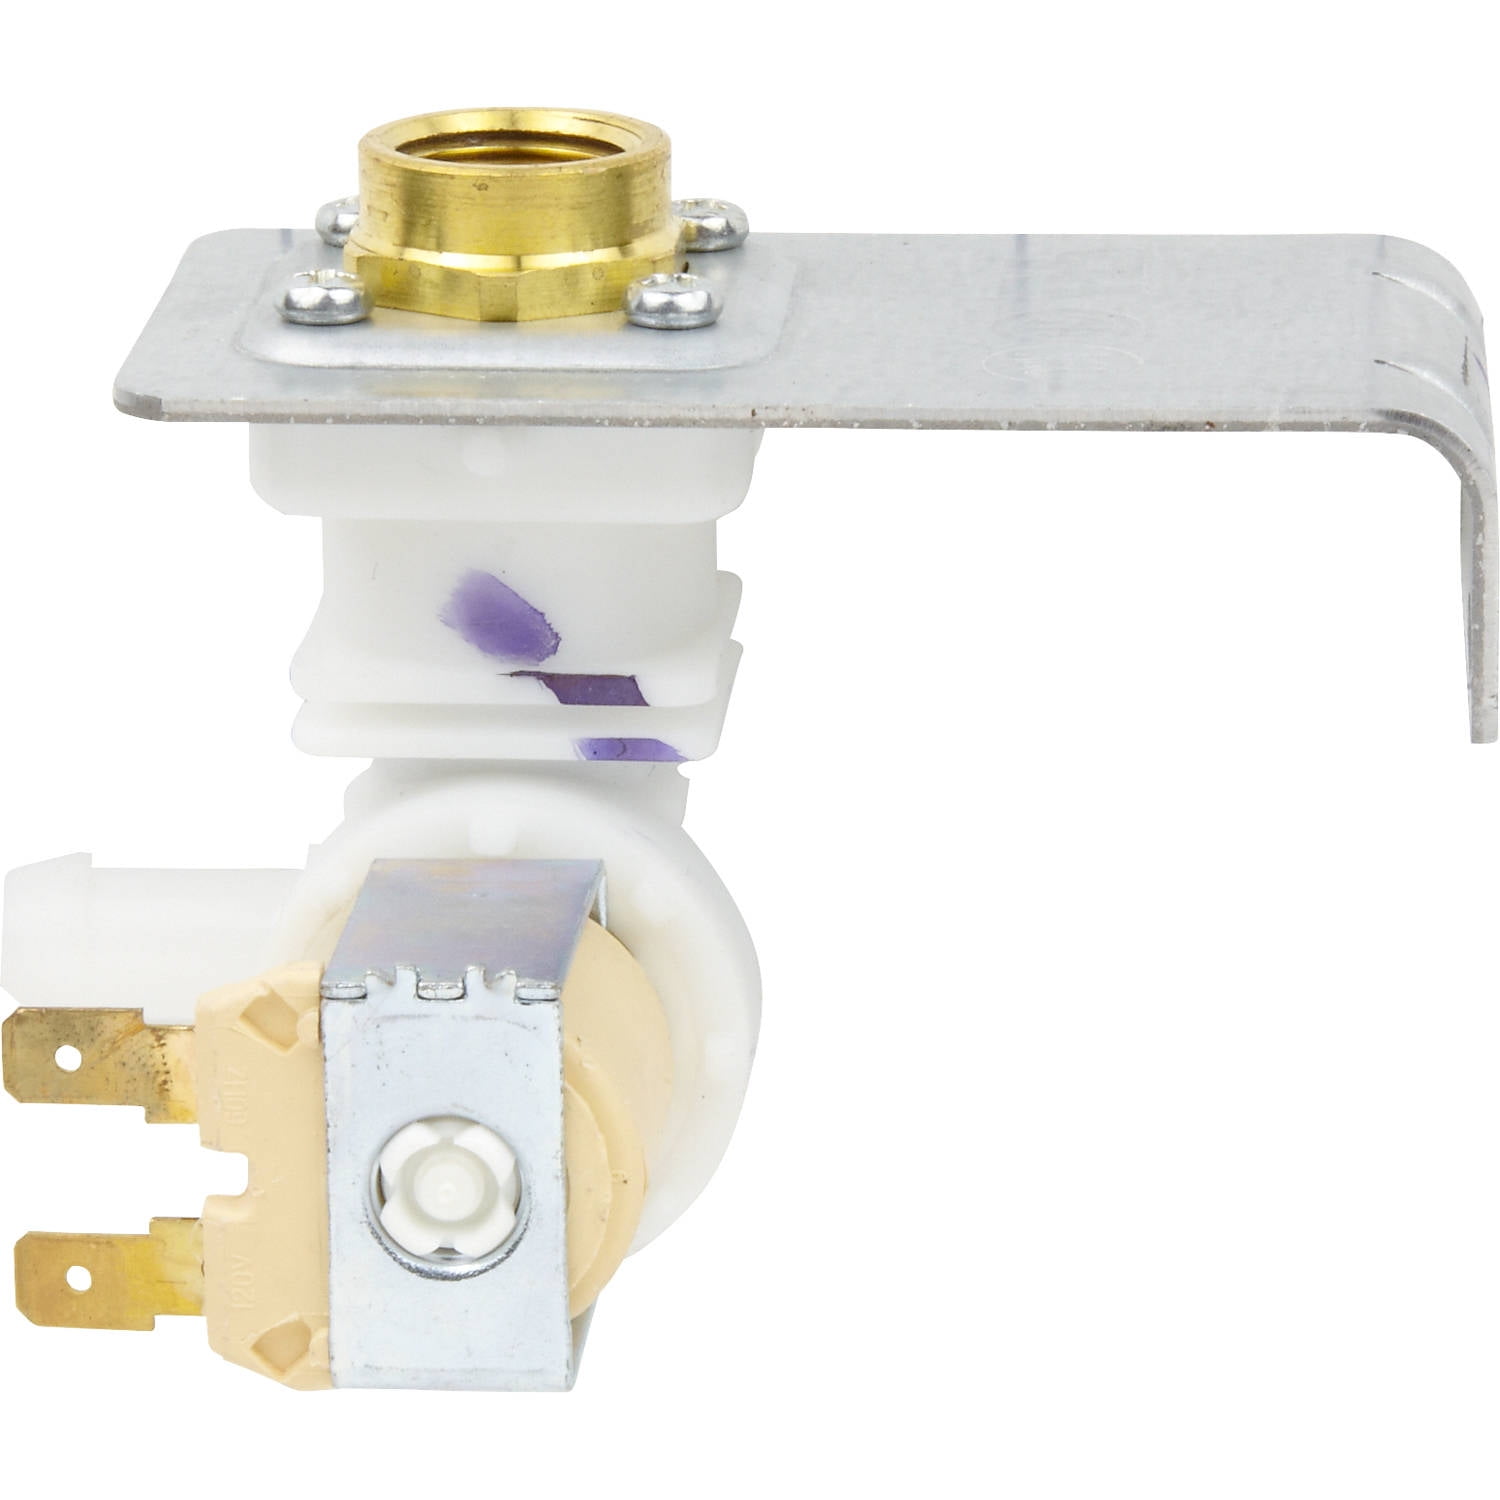 Details about   FRIGIDAIRE WATER INLET VALVE 154637401